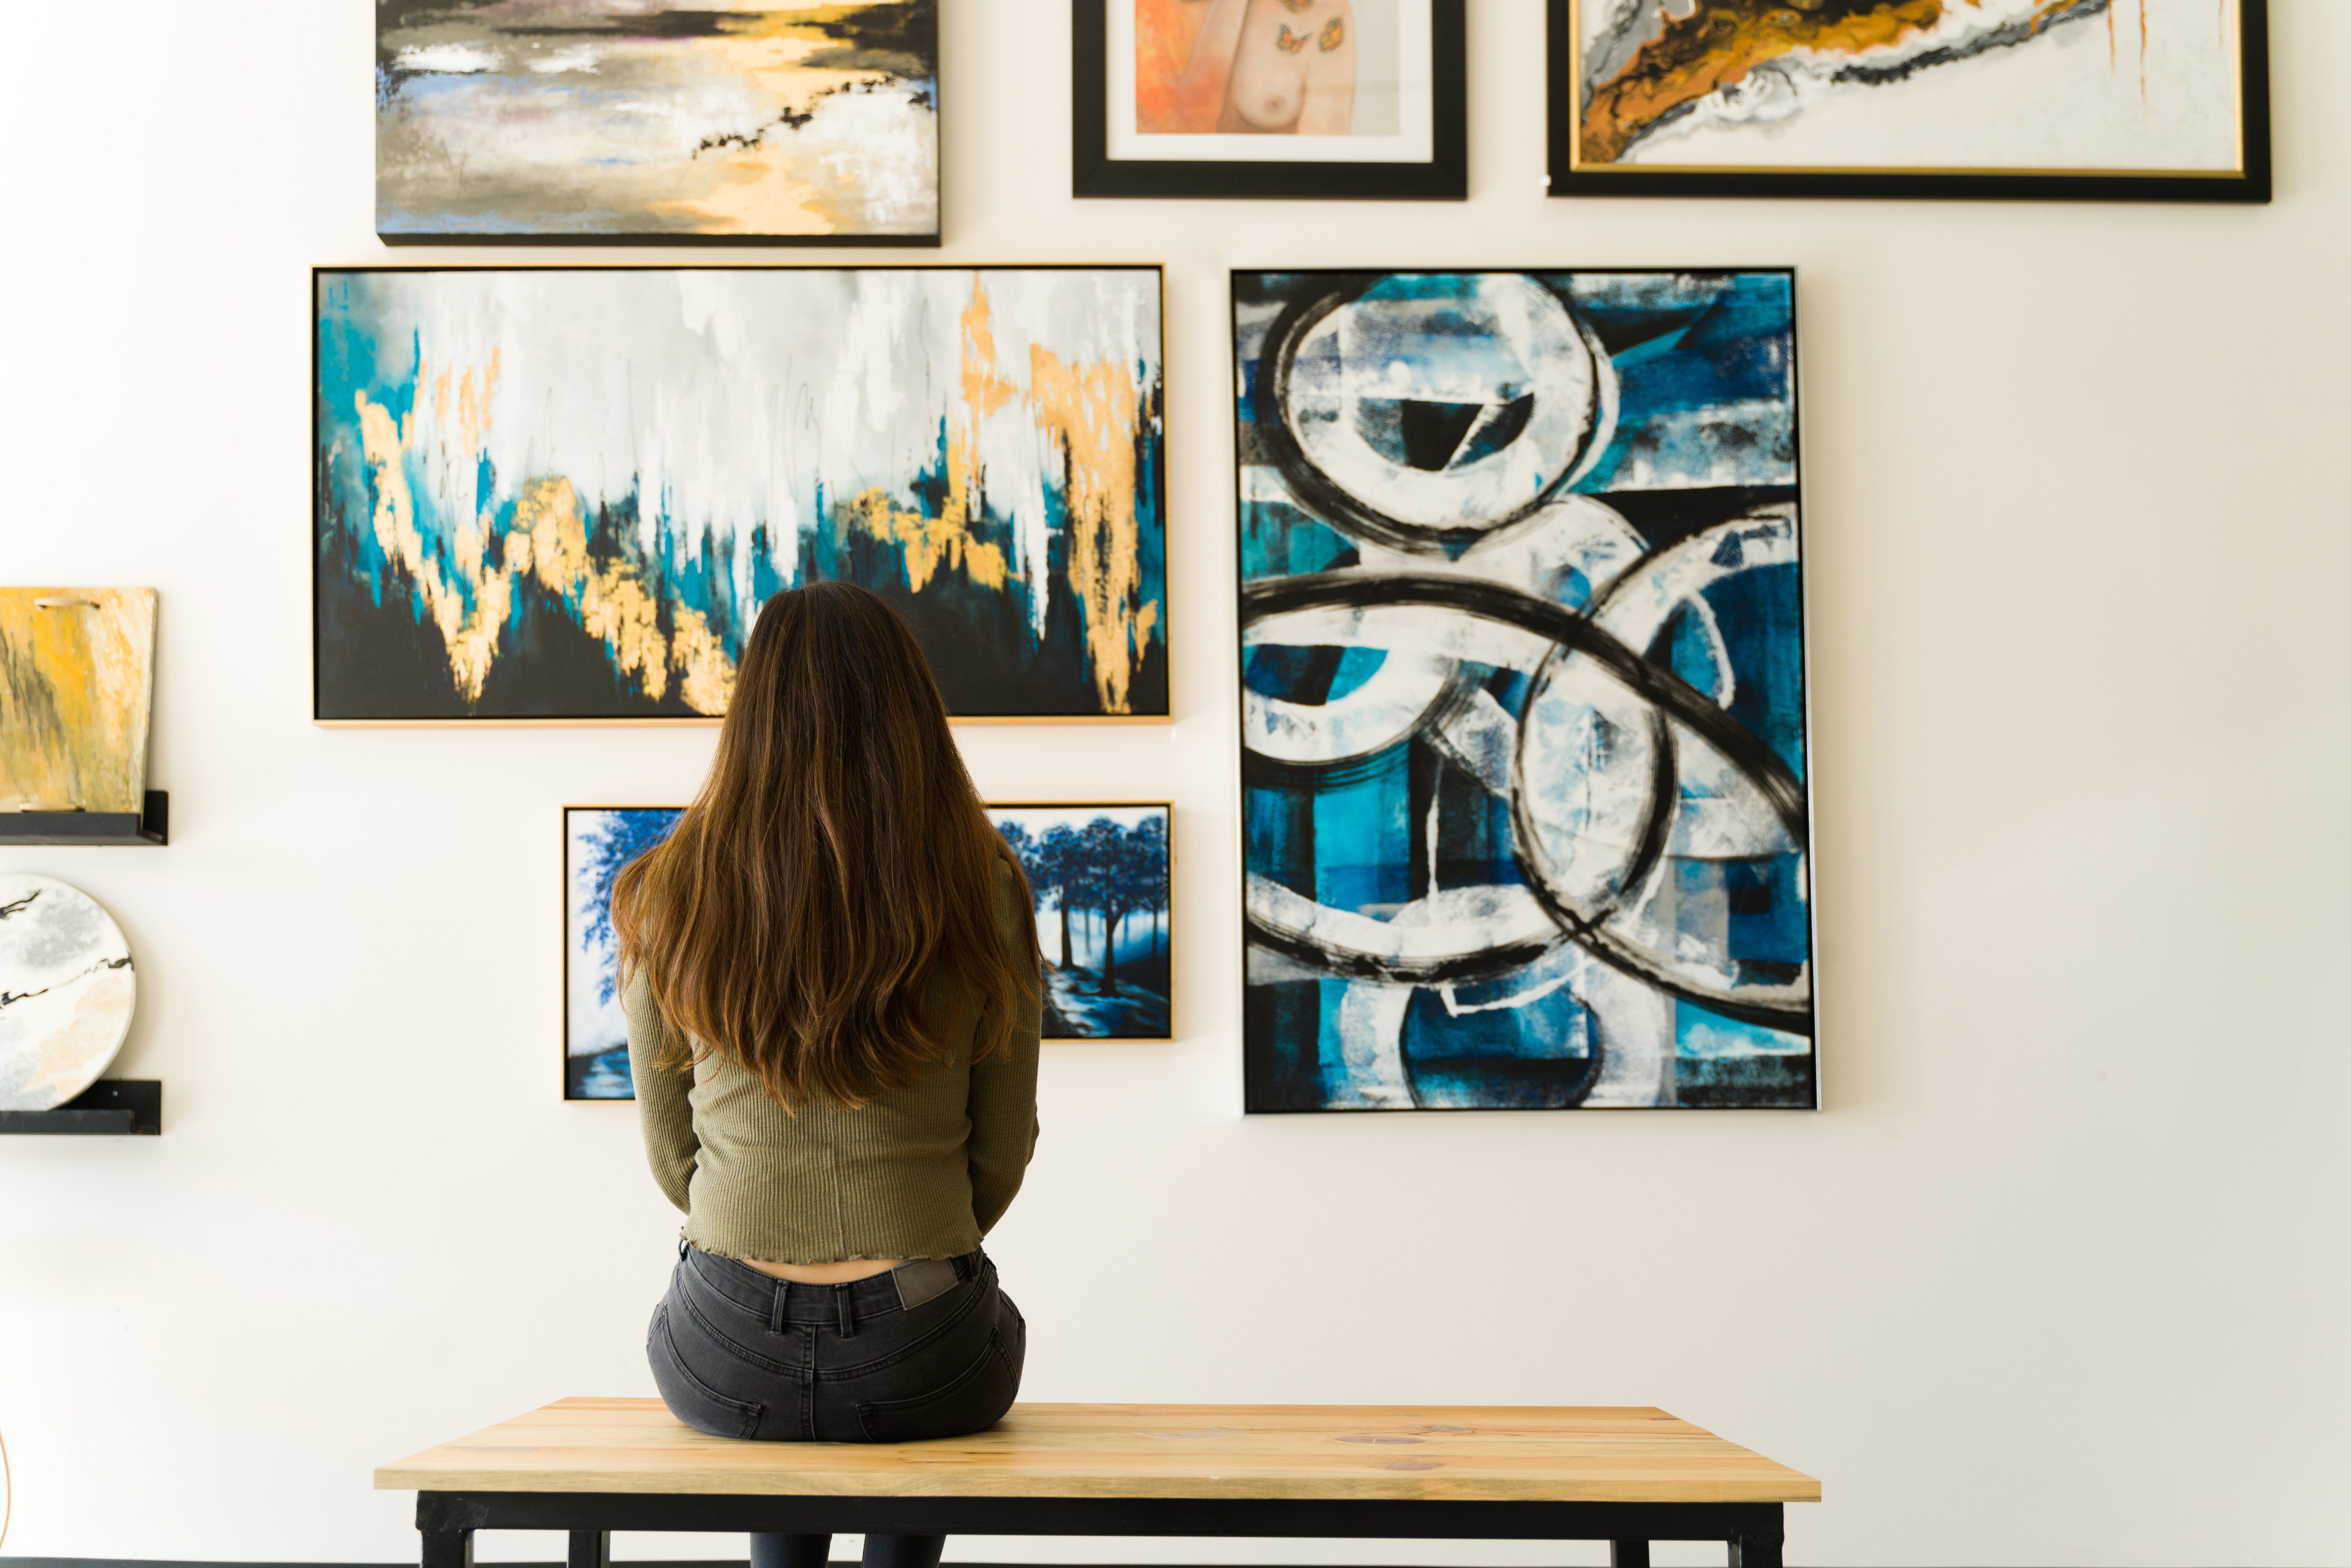 Viewing art in a gallery, museum or fair can produce the same feeling in your body as falling in love – and that is one of many reasons you should look at art, say experts. Photo: Shutterstock